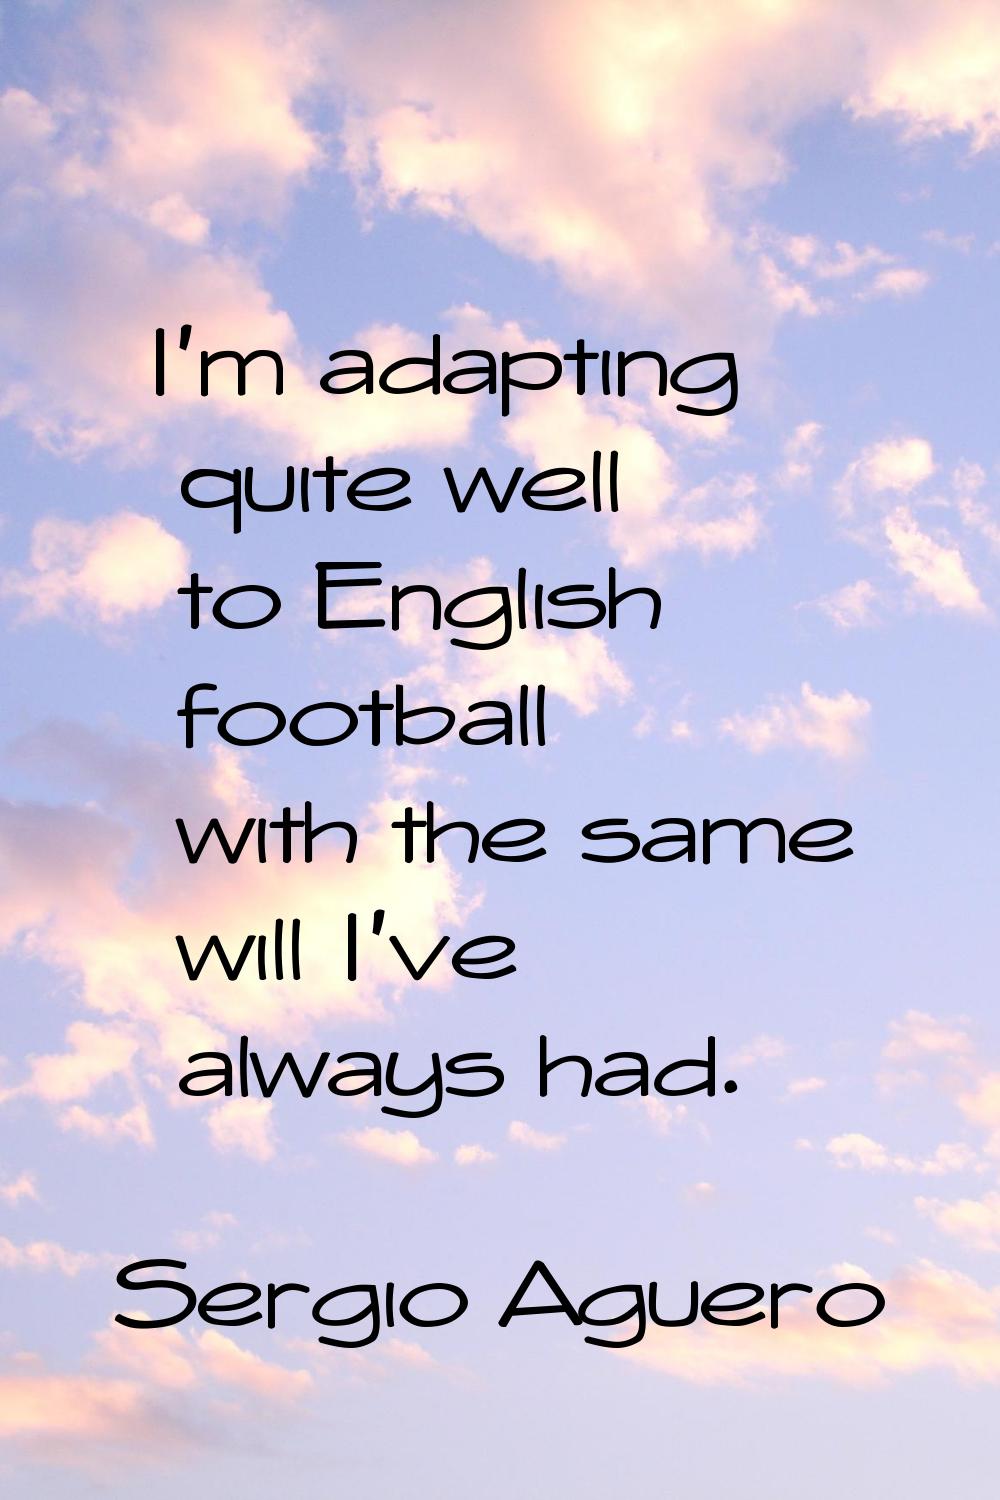 I'm adapting quite well to English football with the same will I've always had.